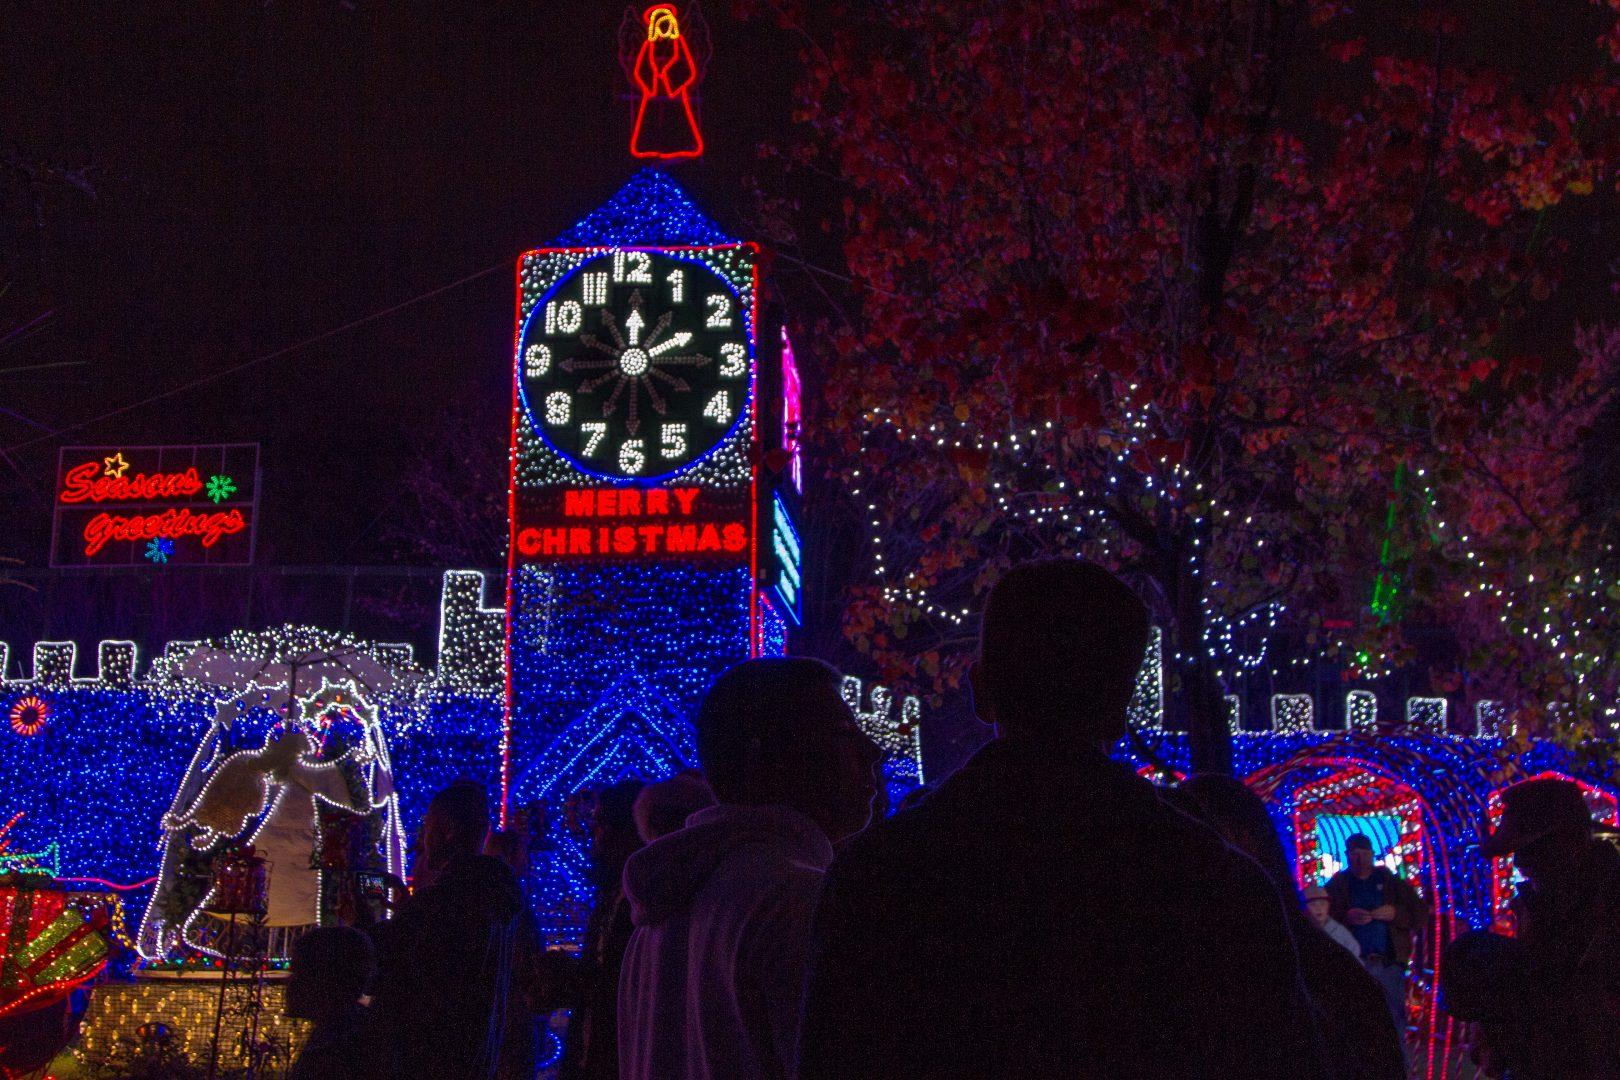 The Collegian
visitors take a look at one of the many houses decorated at Christmas Tree Lane during the first walk night on Saturday, Dec. 1. The lane will be open to the public through Christmas Day. (Photo credits to Paul Schlesinger)